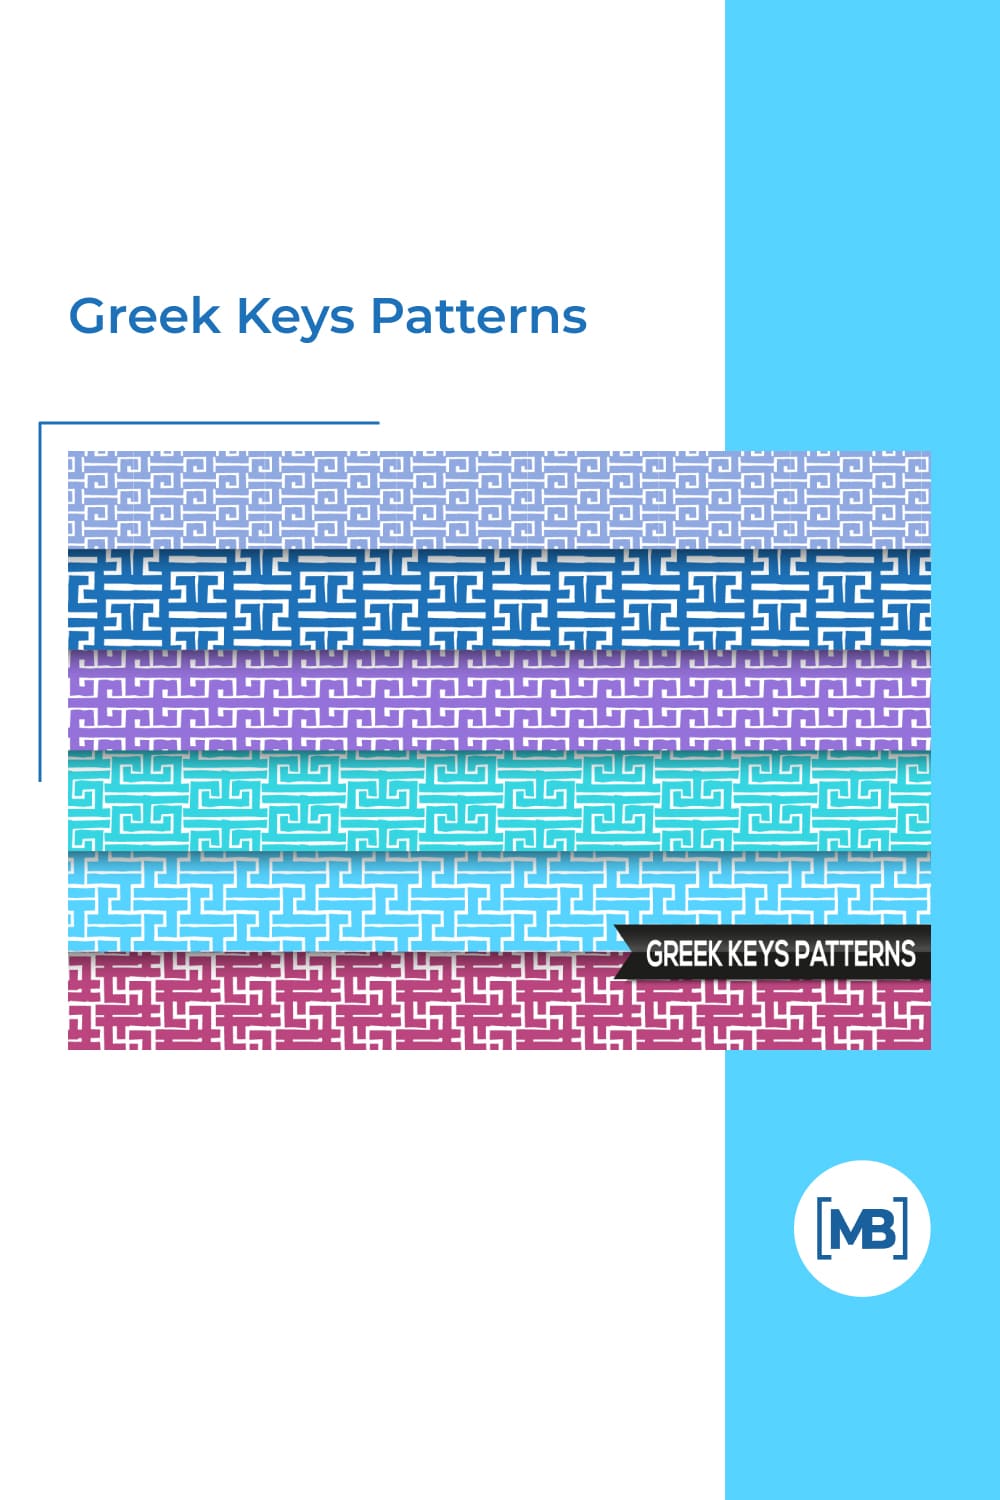 Greek patterns with small elements.